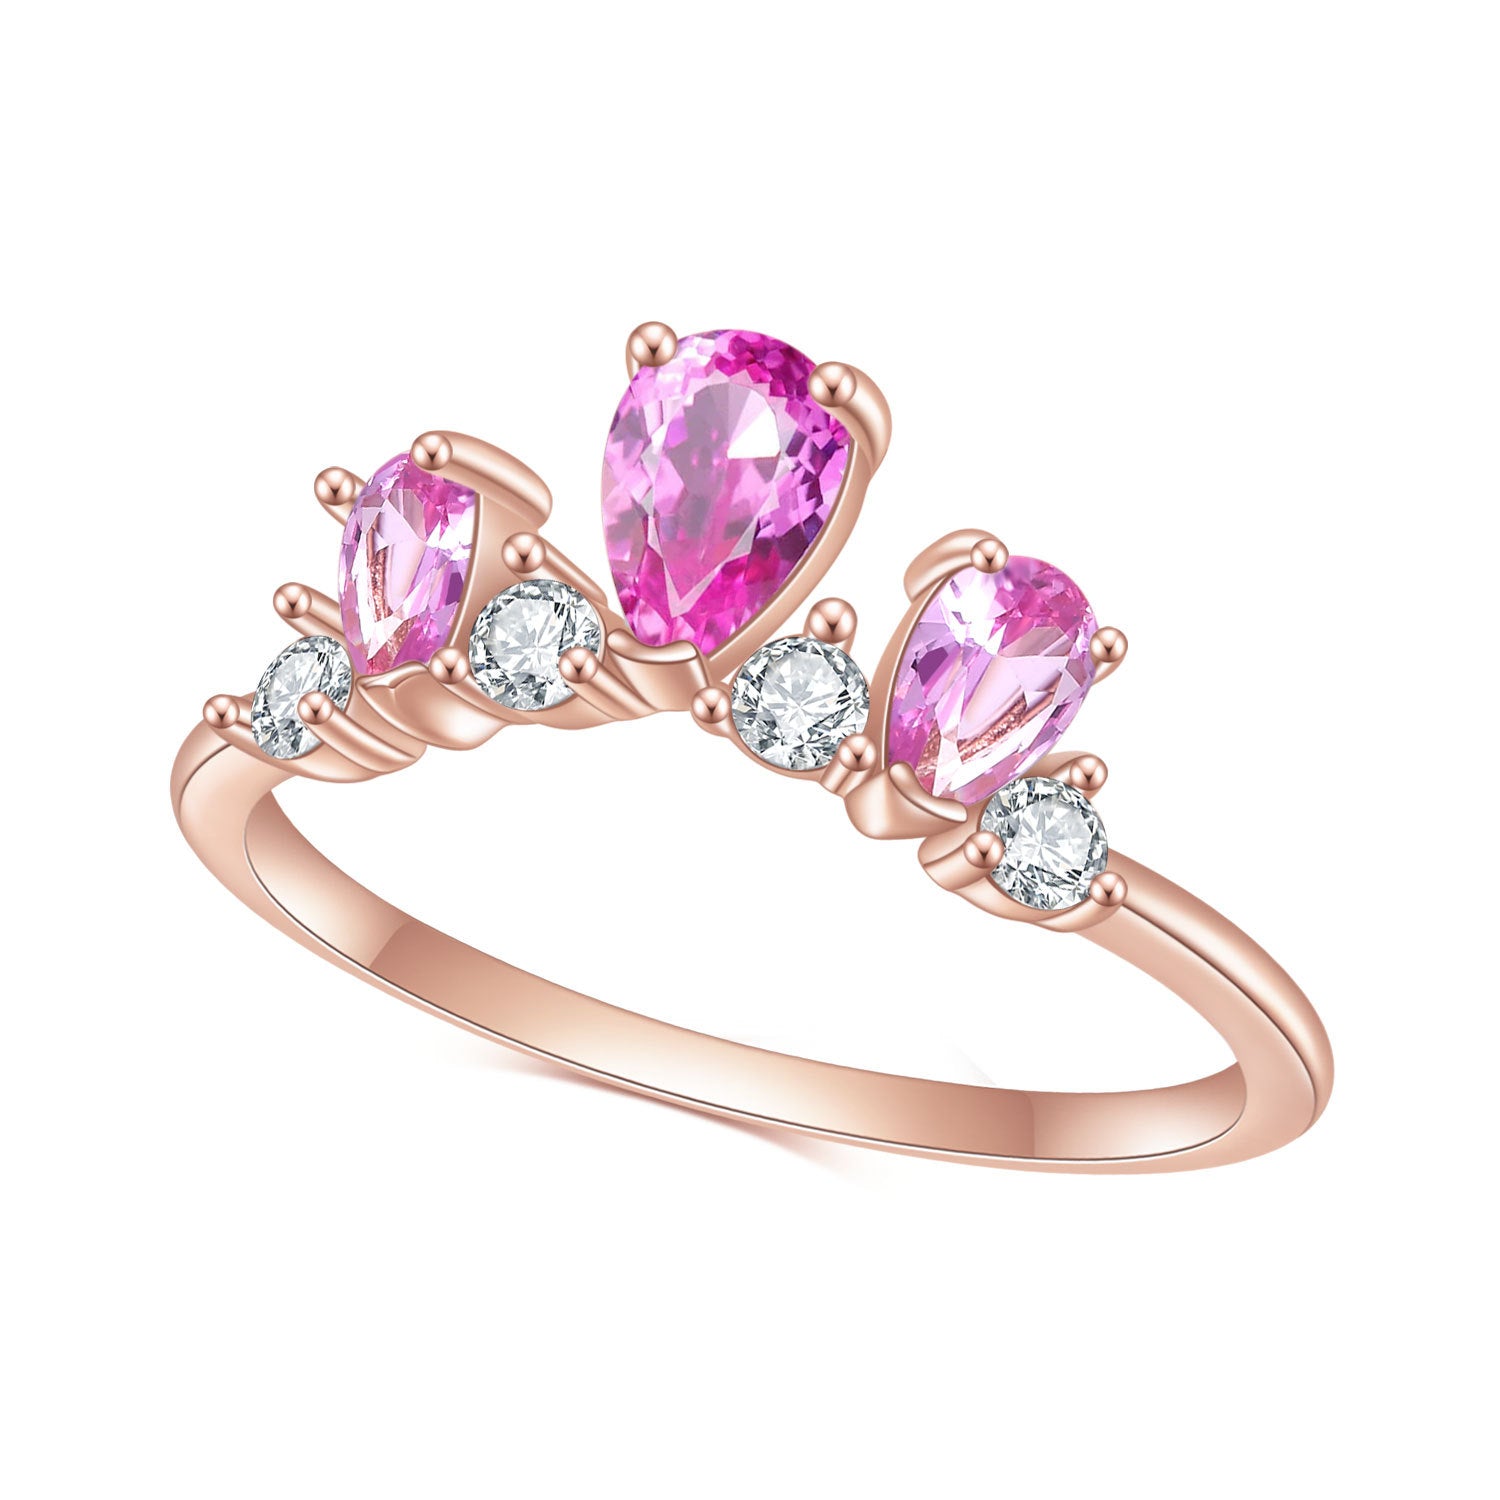 Luxury S925 Sterling Silver Pink Colored Gems with Rose Gold Colour Ring for Women